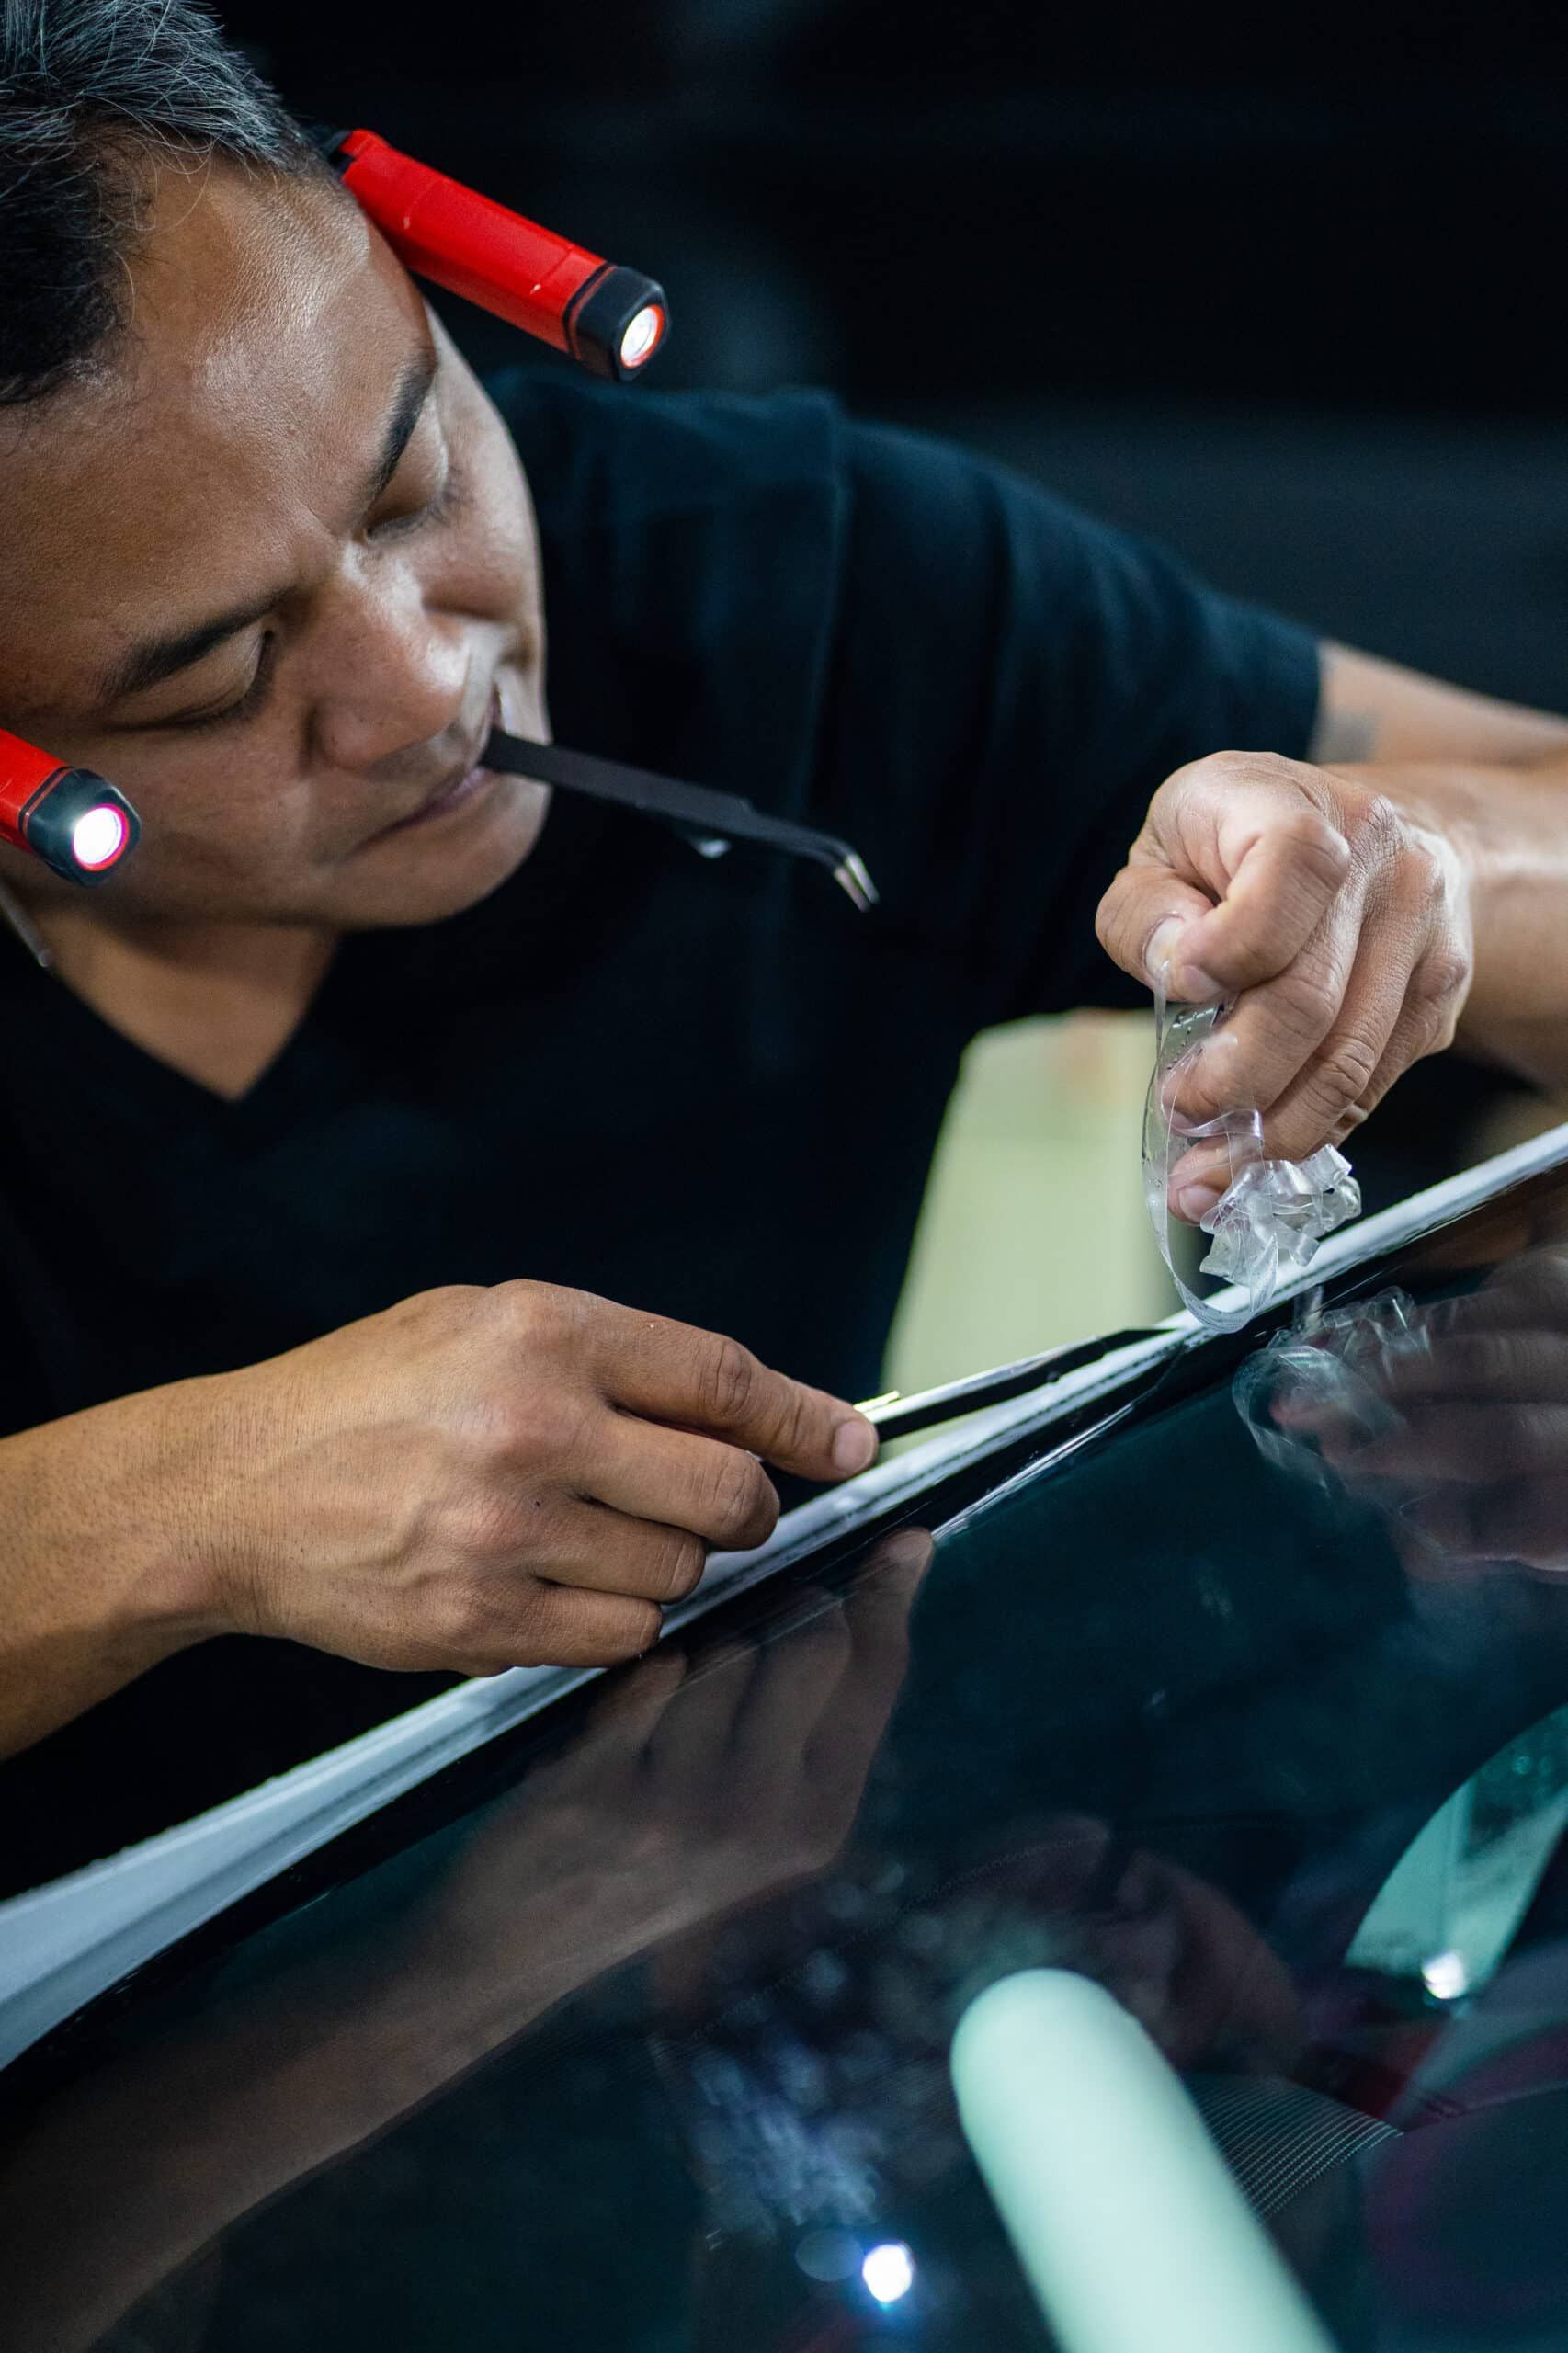 A man is working on a car windshield with a flashlight.